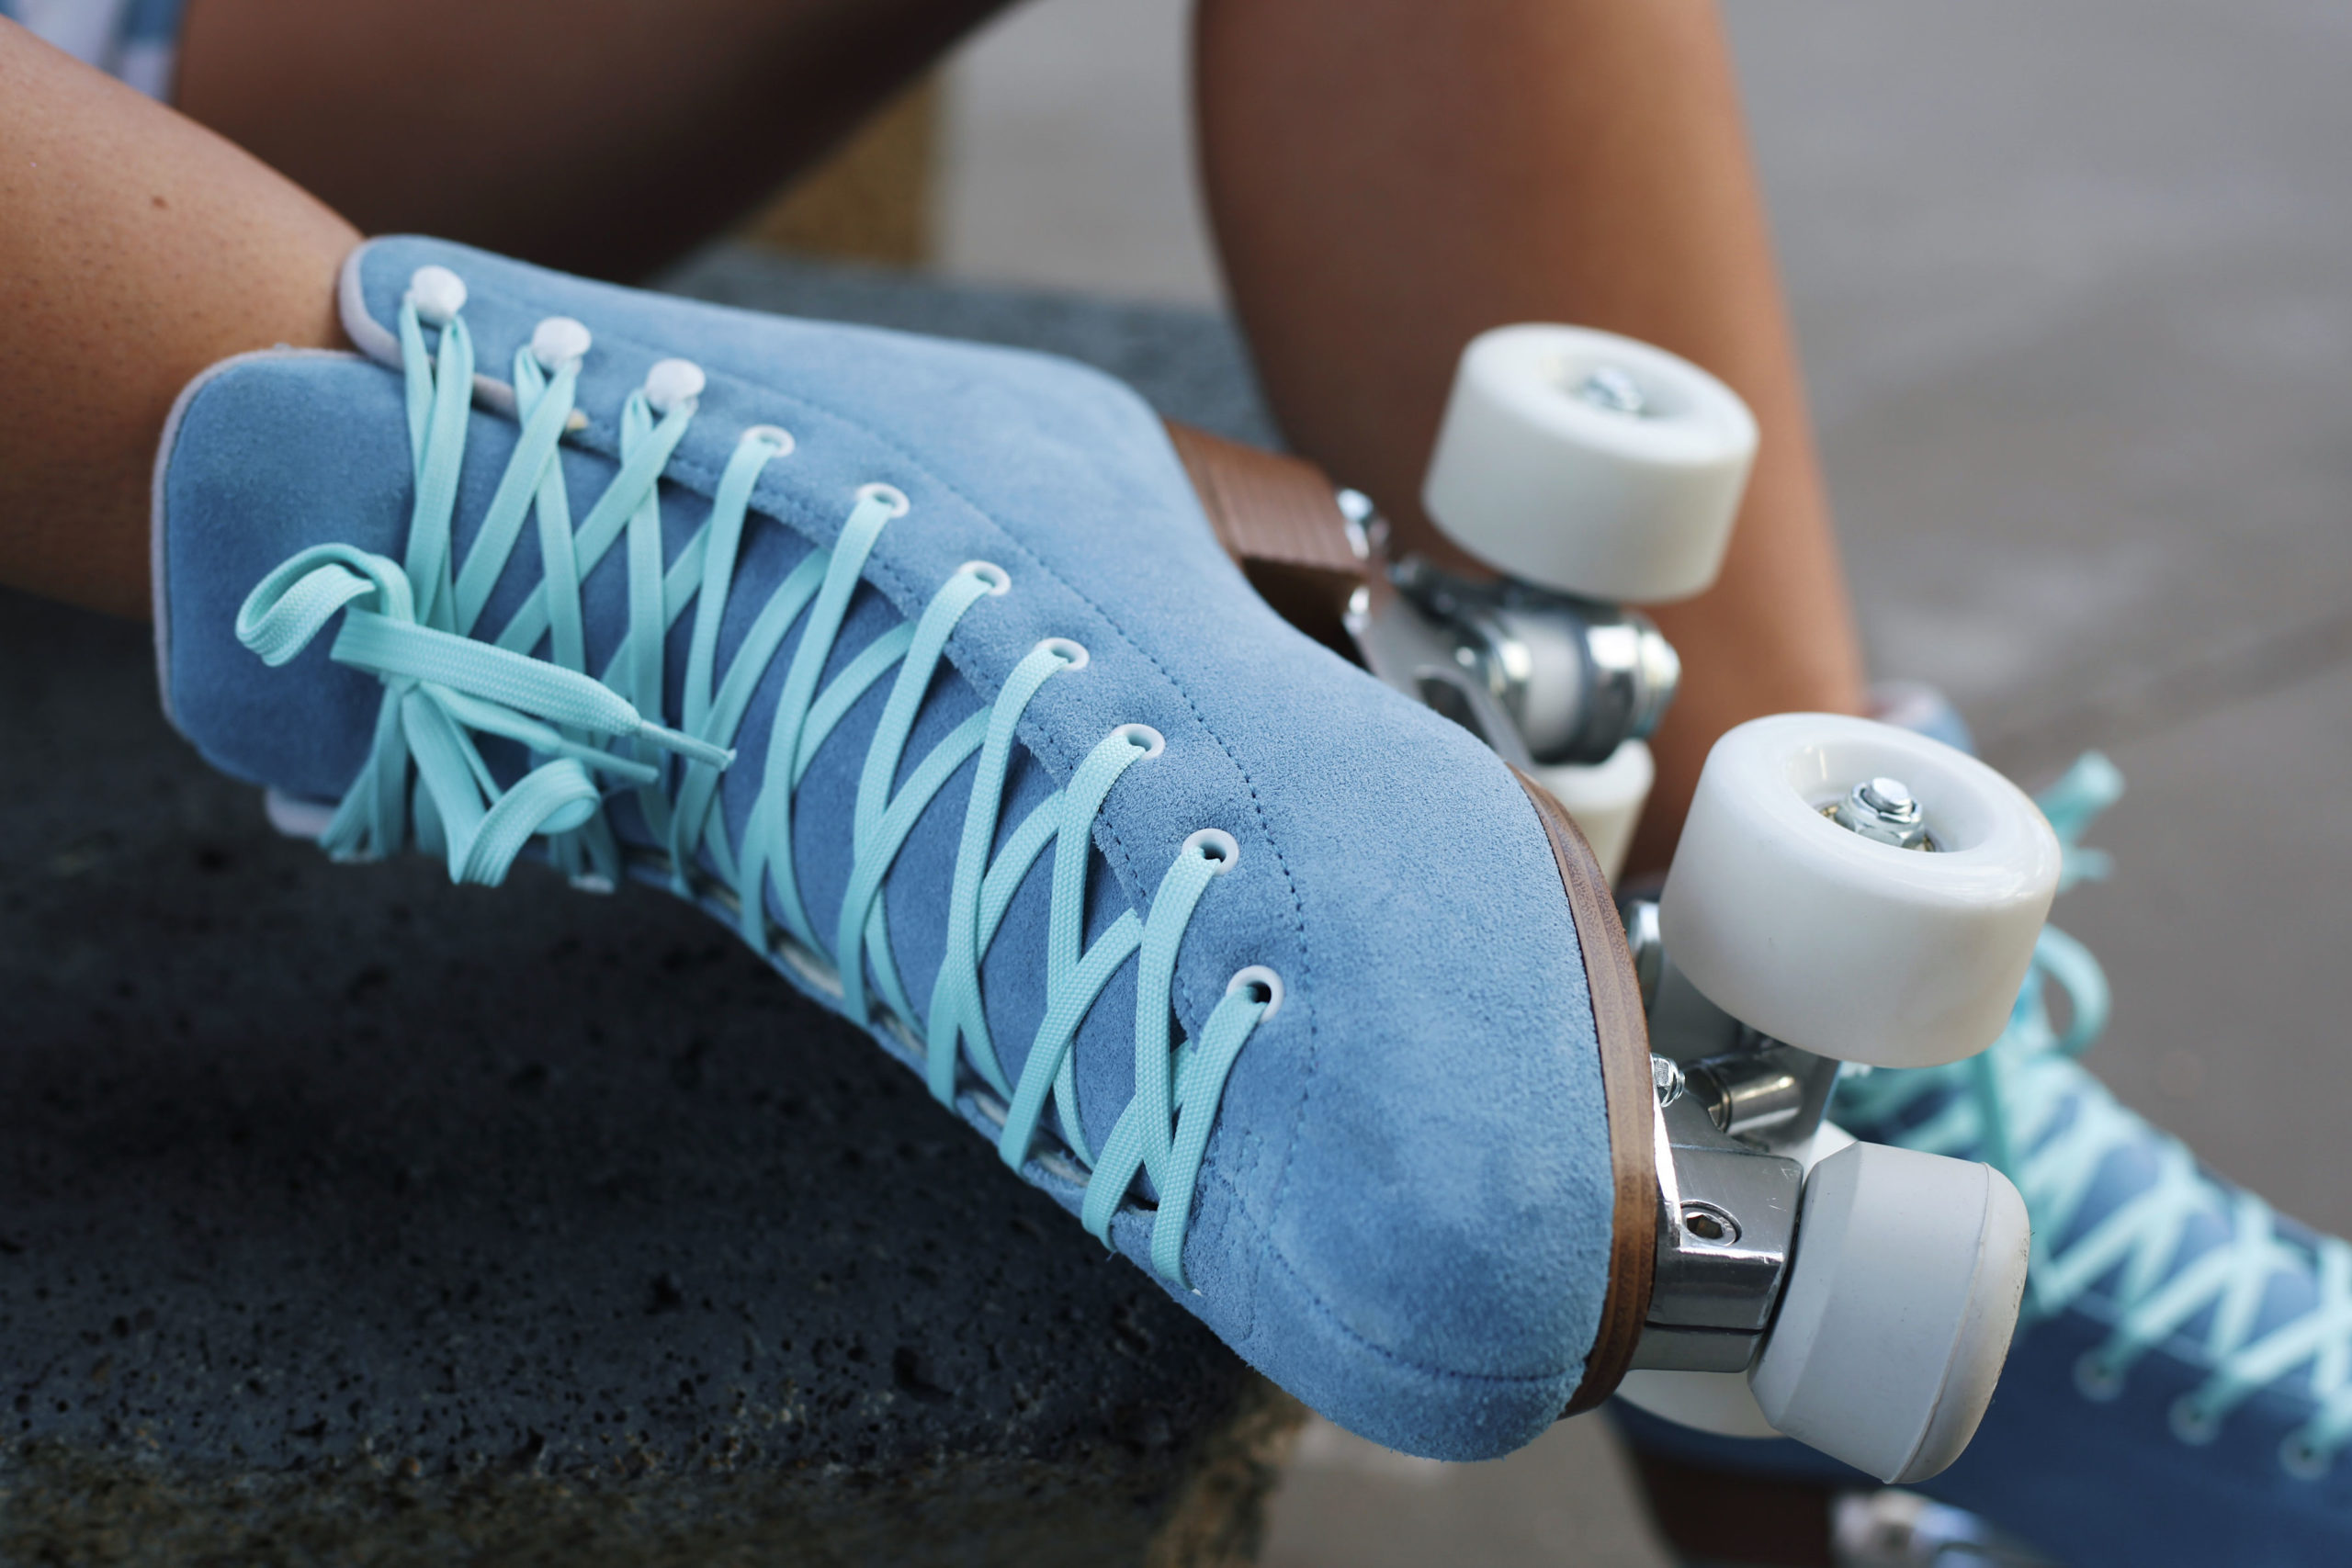 TheSeedProject – NZ's Roller Skates Brand!